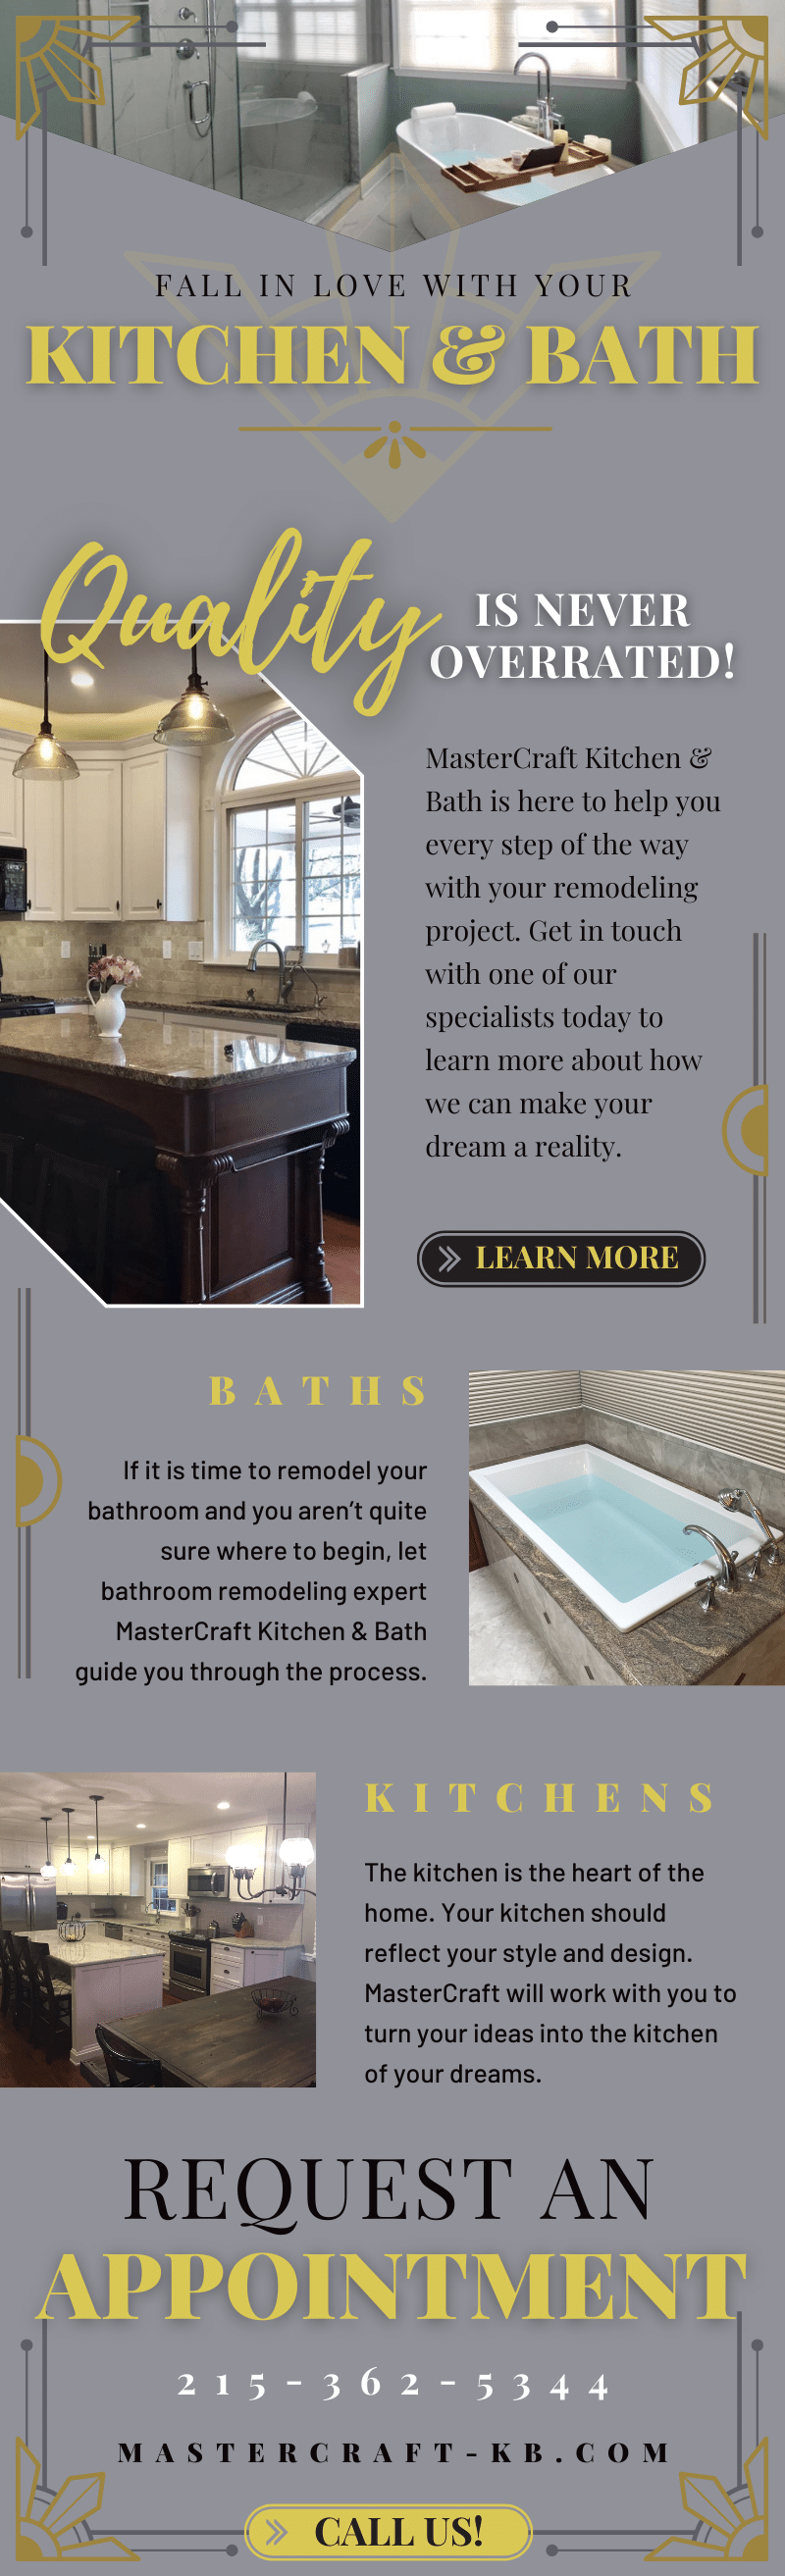 Fall In Love With Your Kitchen and Bath! 3